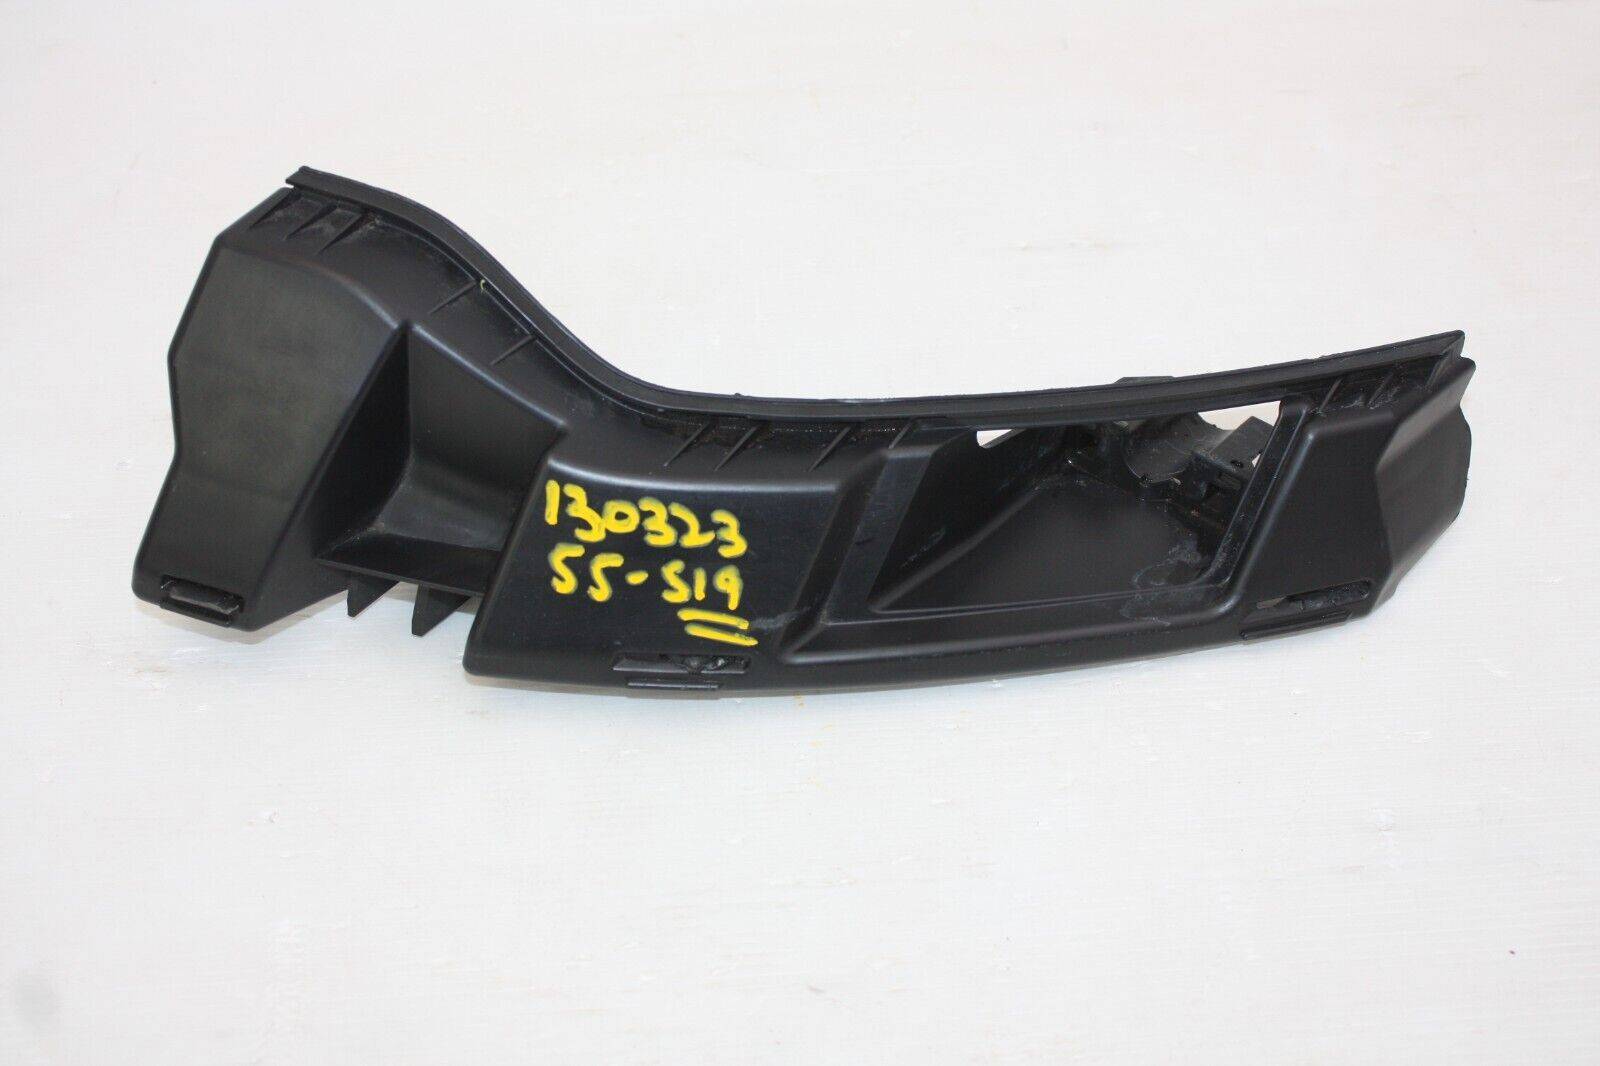 Land Rover Discovery Sport Front Bumper Left Bracket 2015 to 2019 FK72 17E763 BA 175649701878